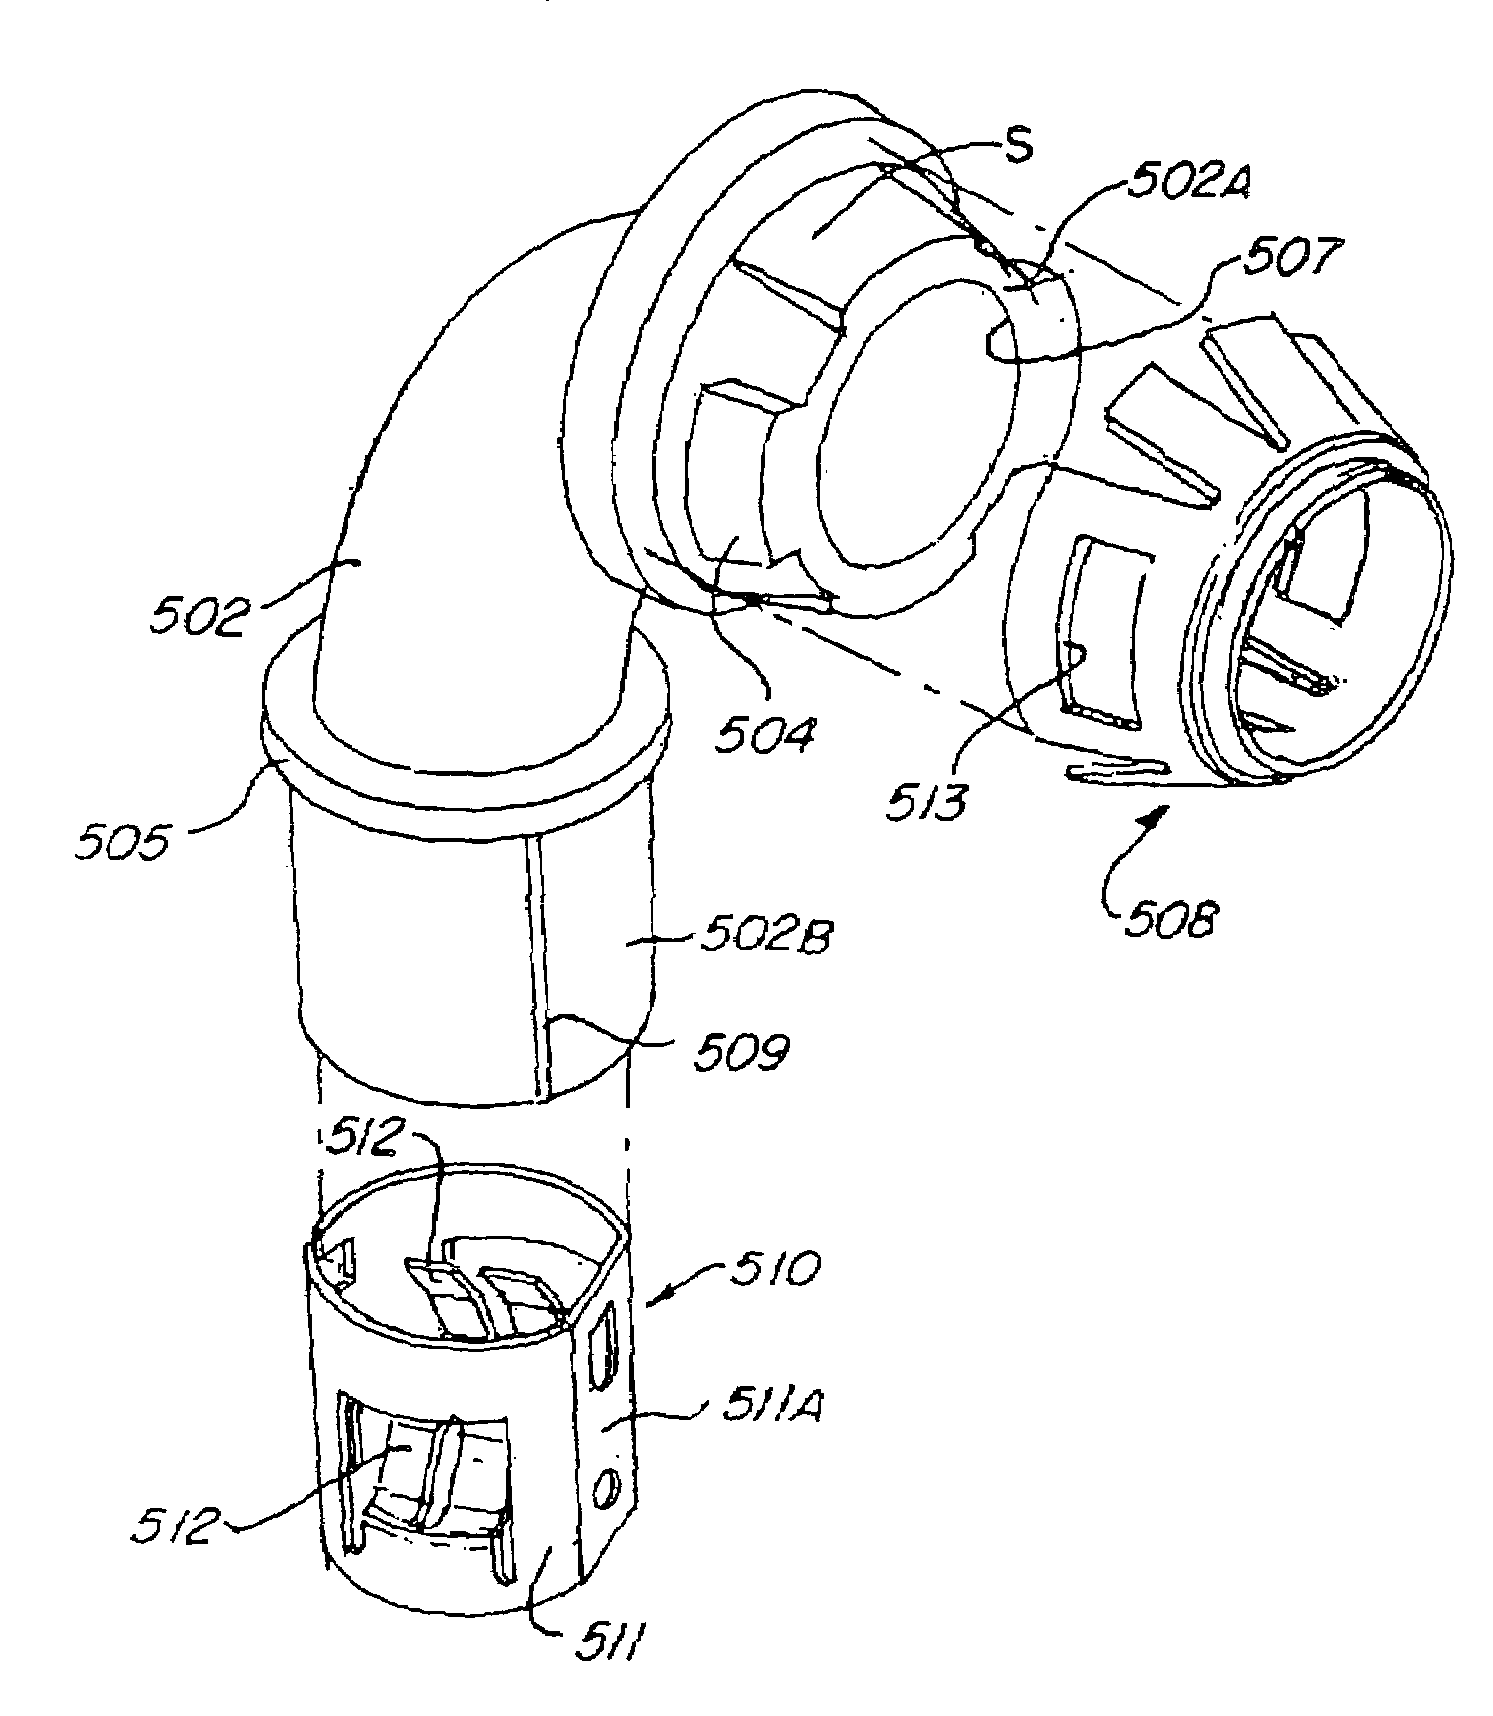 Electrical connector having an outlet end angularly disposed relative an inlet end with outer retainer ring about the outlet end and internal unidirectional conductor retainer in the inlet end